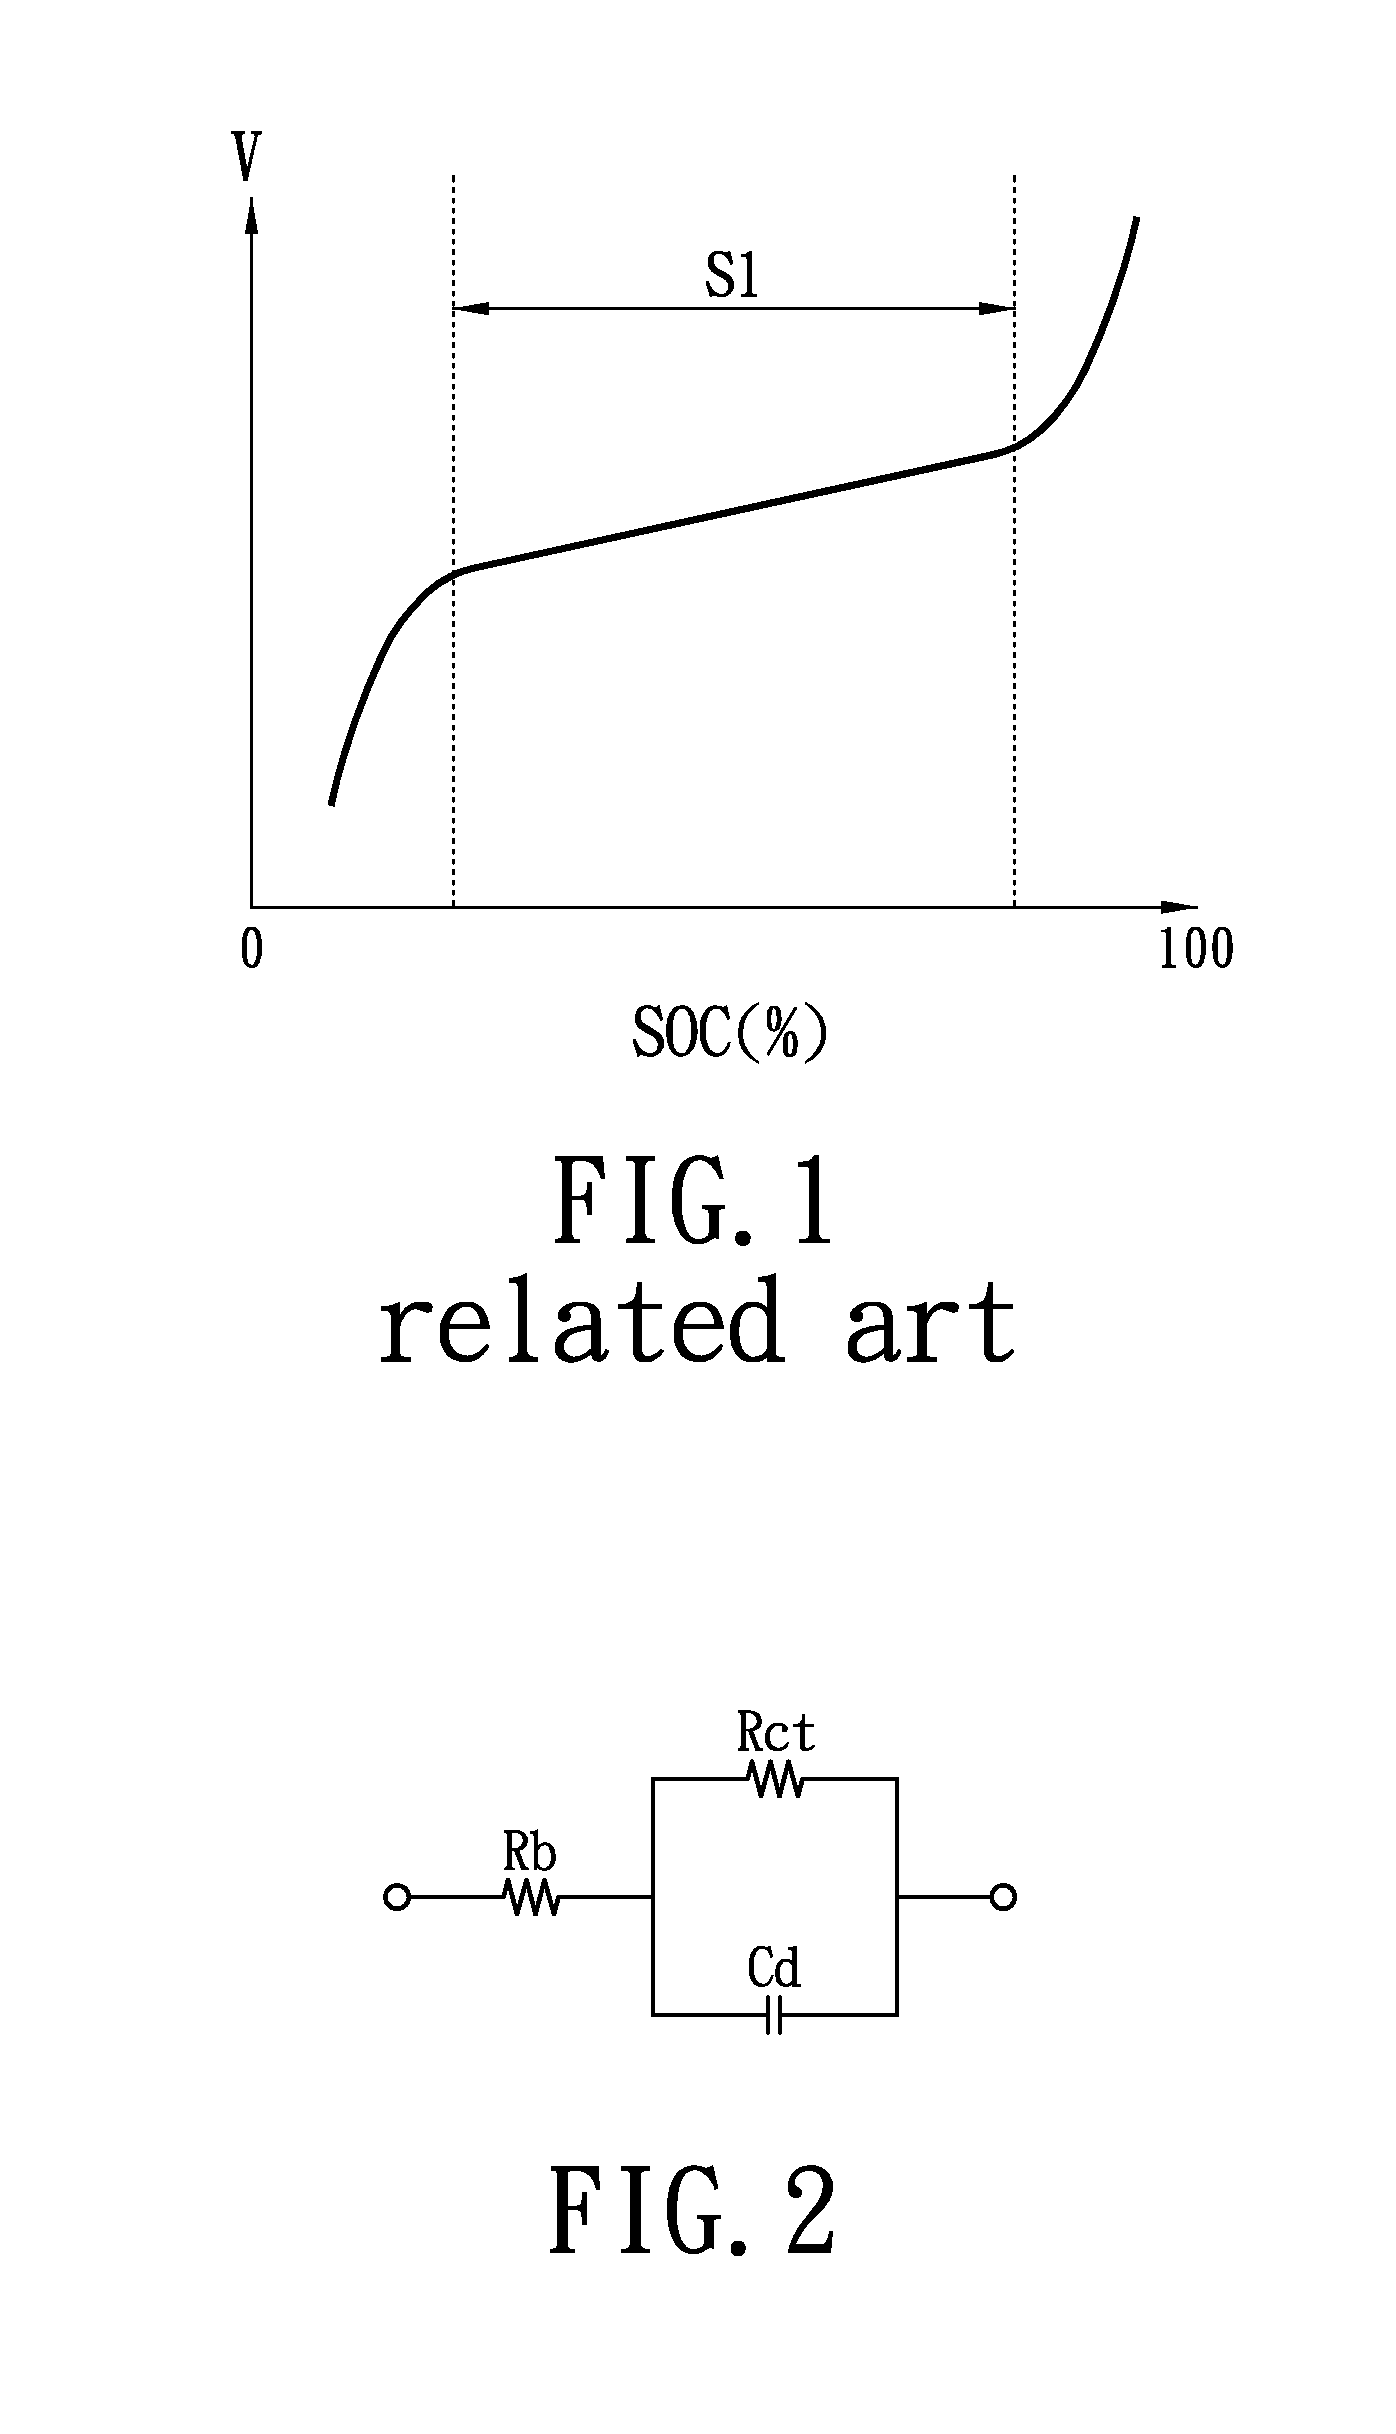 Method and apparatus for detecting state of charge of battery